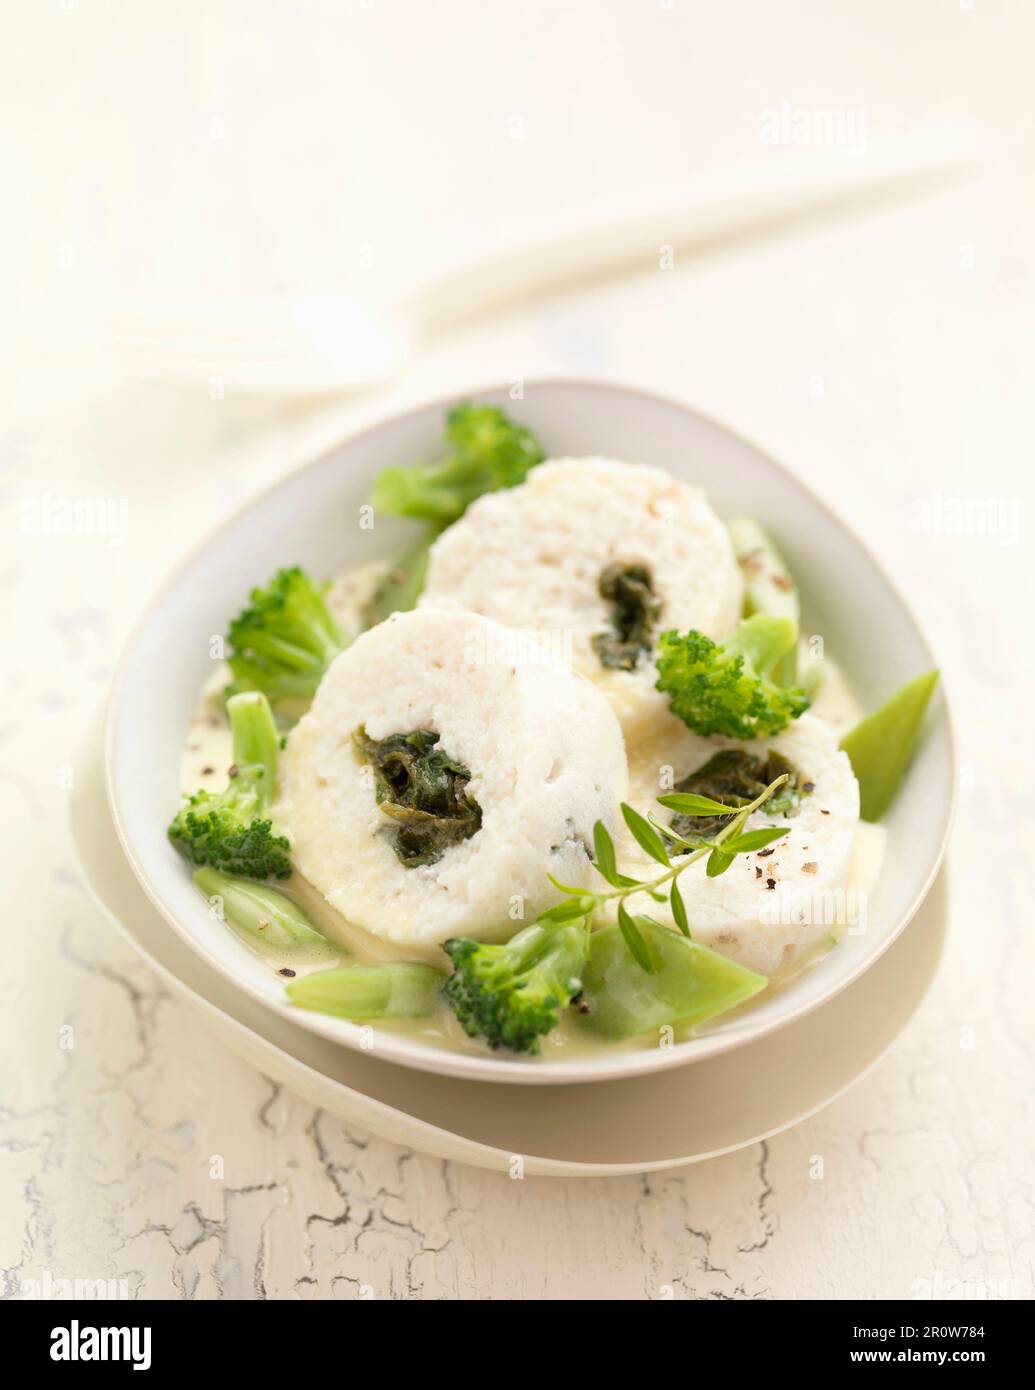 Fish sausage with green vegetables Stock Photo